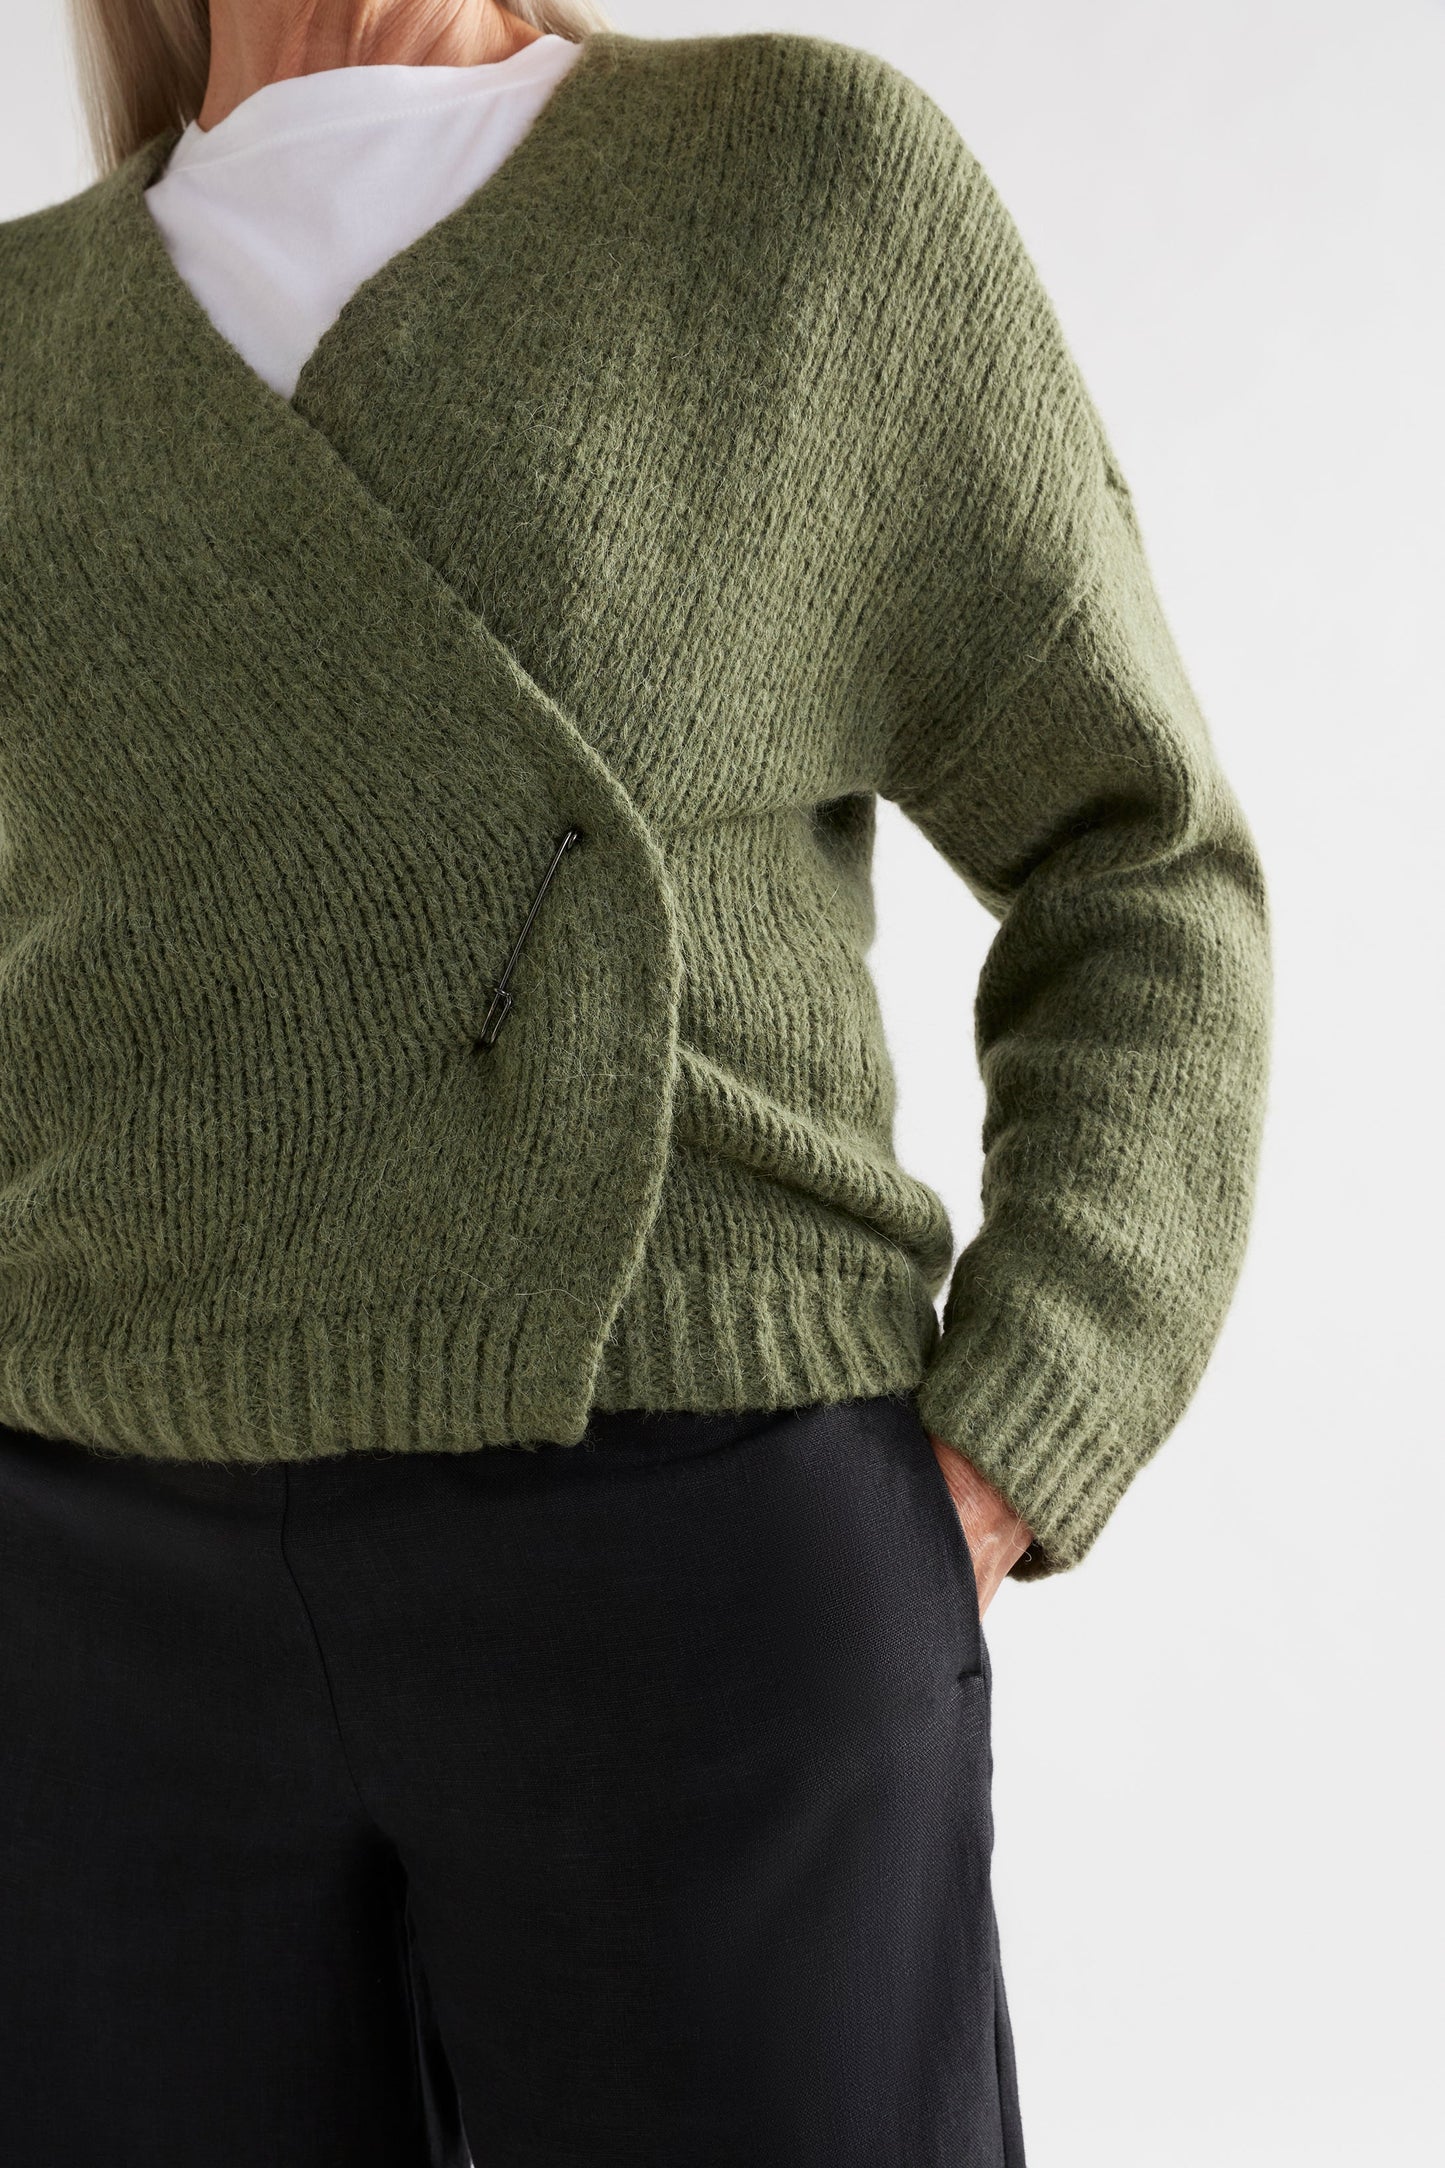 Alli Alpaca Merino Fluffy Wrap Cardigan with Large Safety Pin Closure model front detail | DARK OLIVE